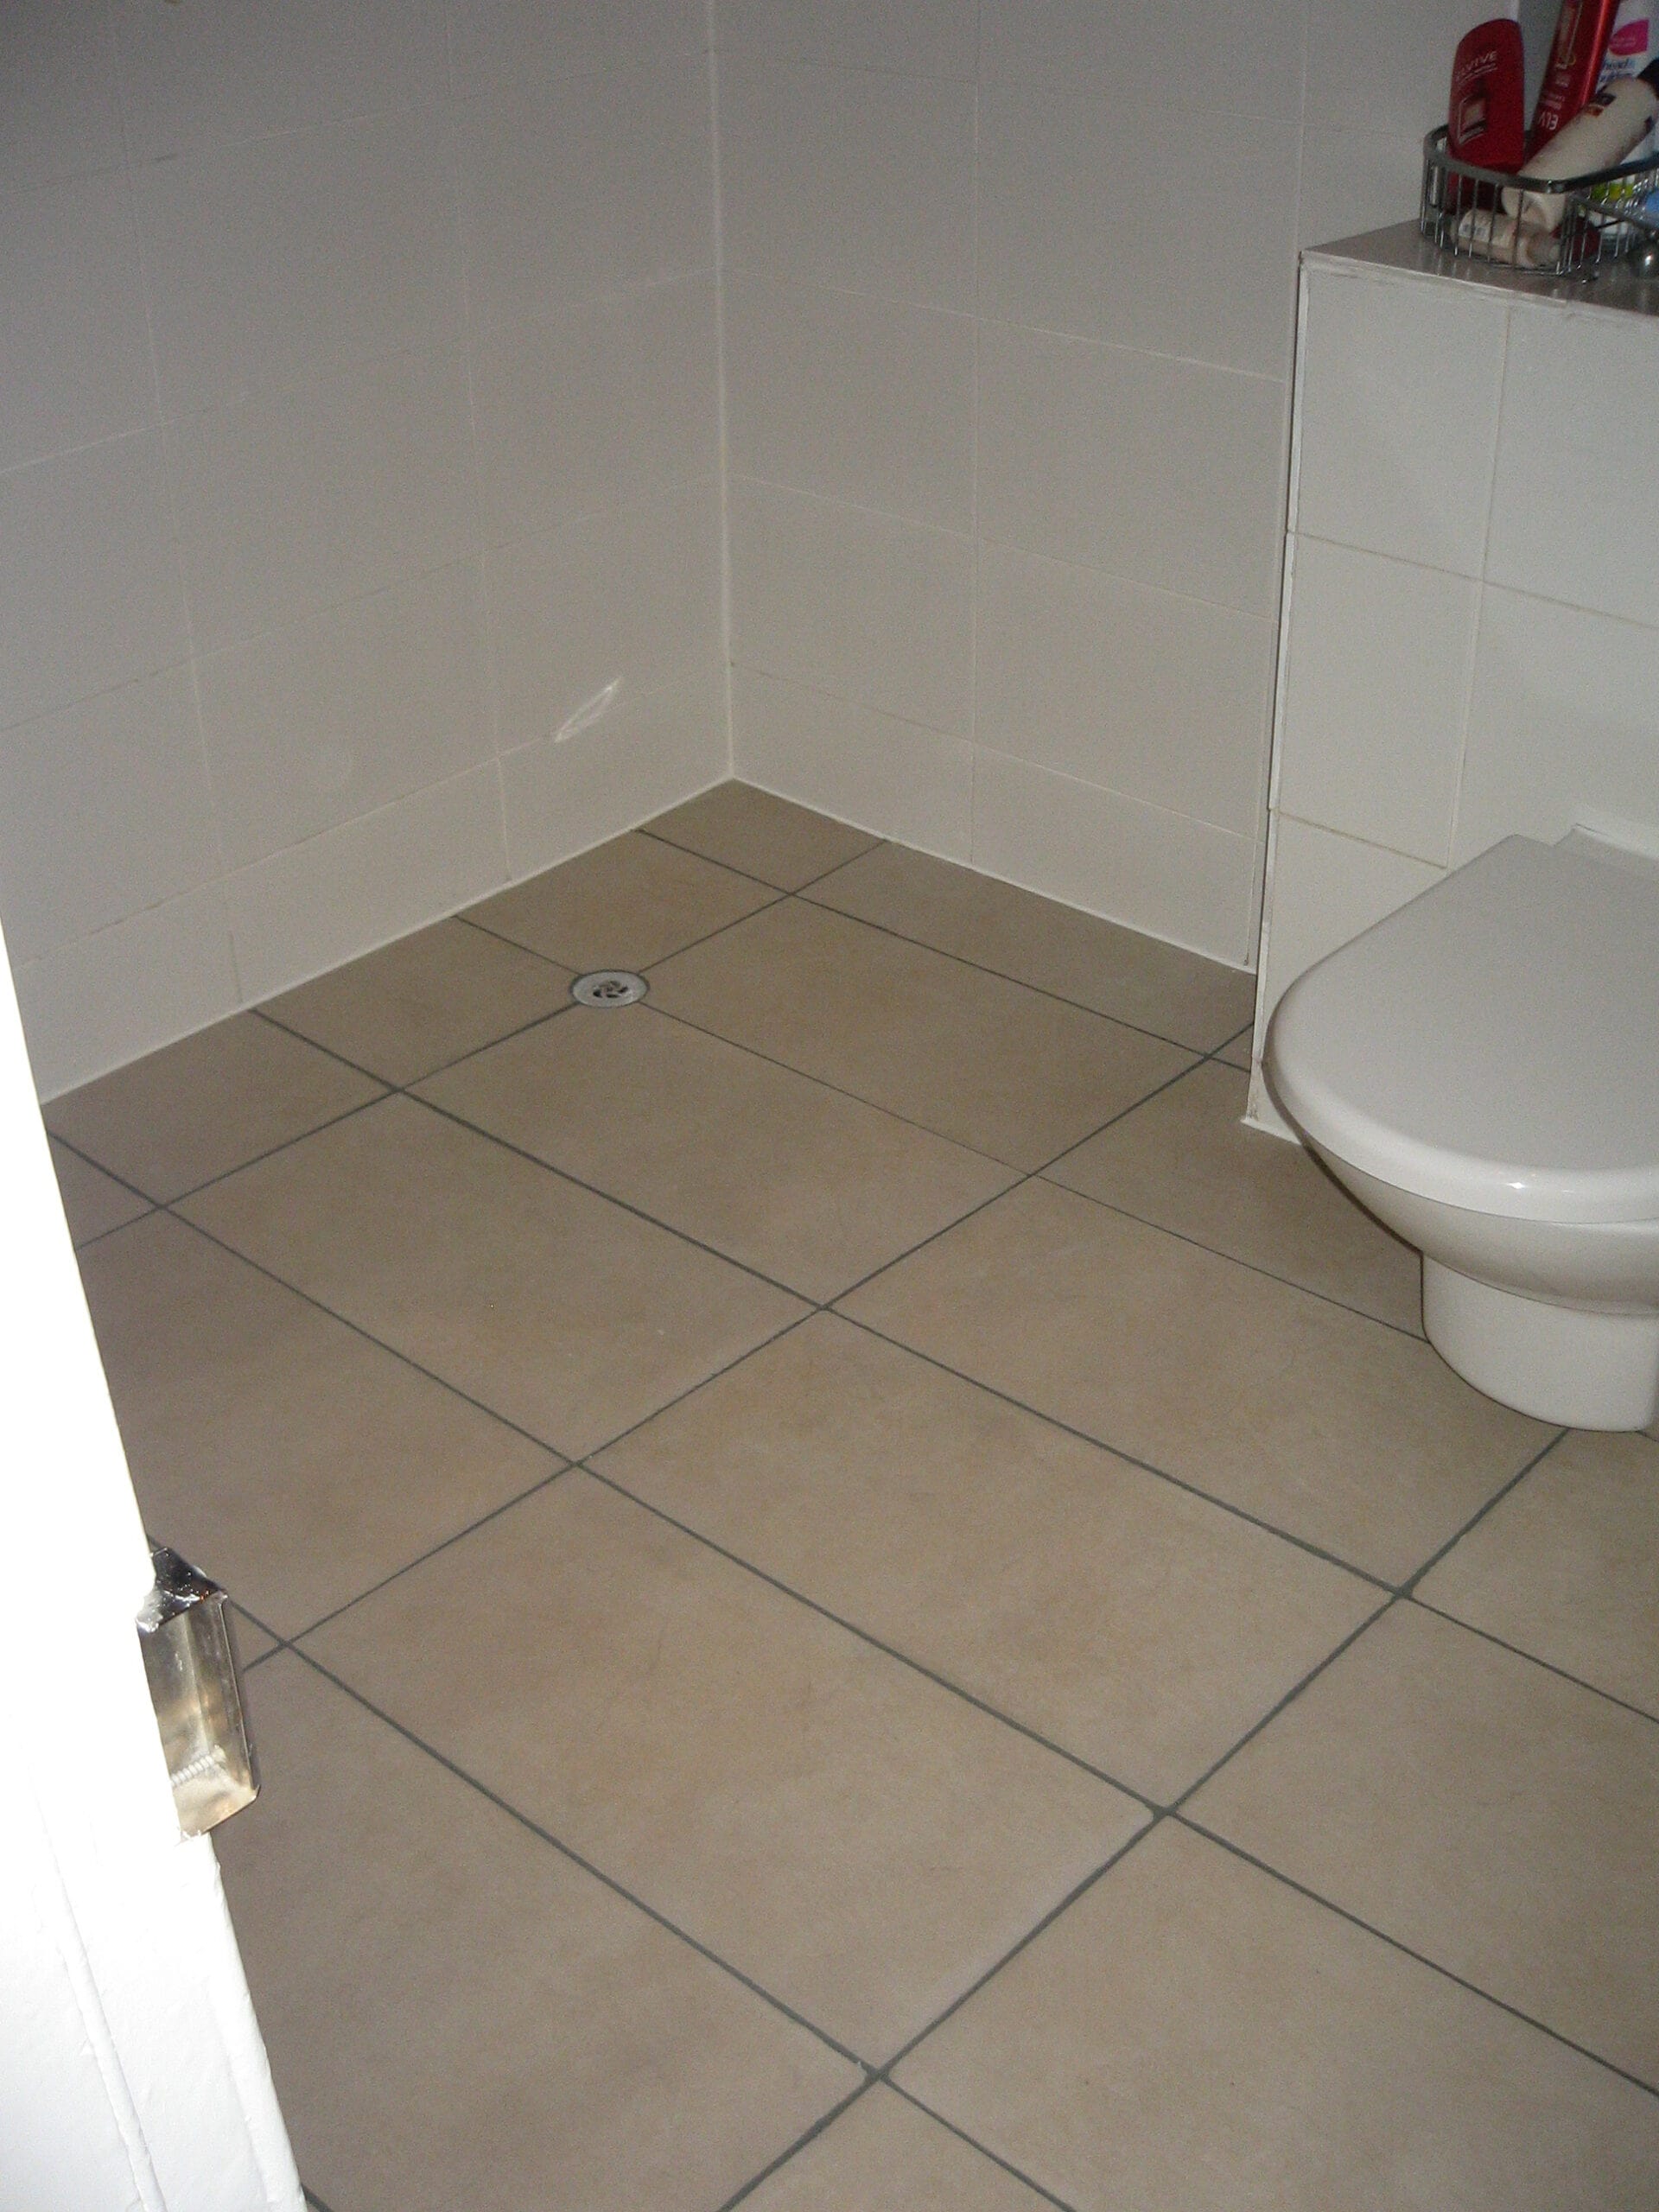 After-Grout-Colouring